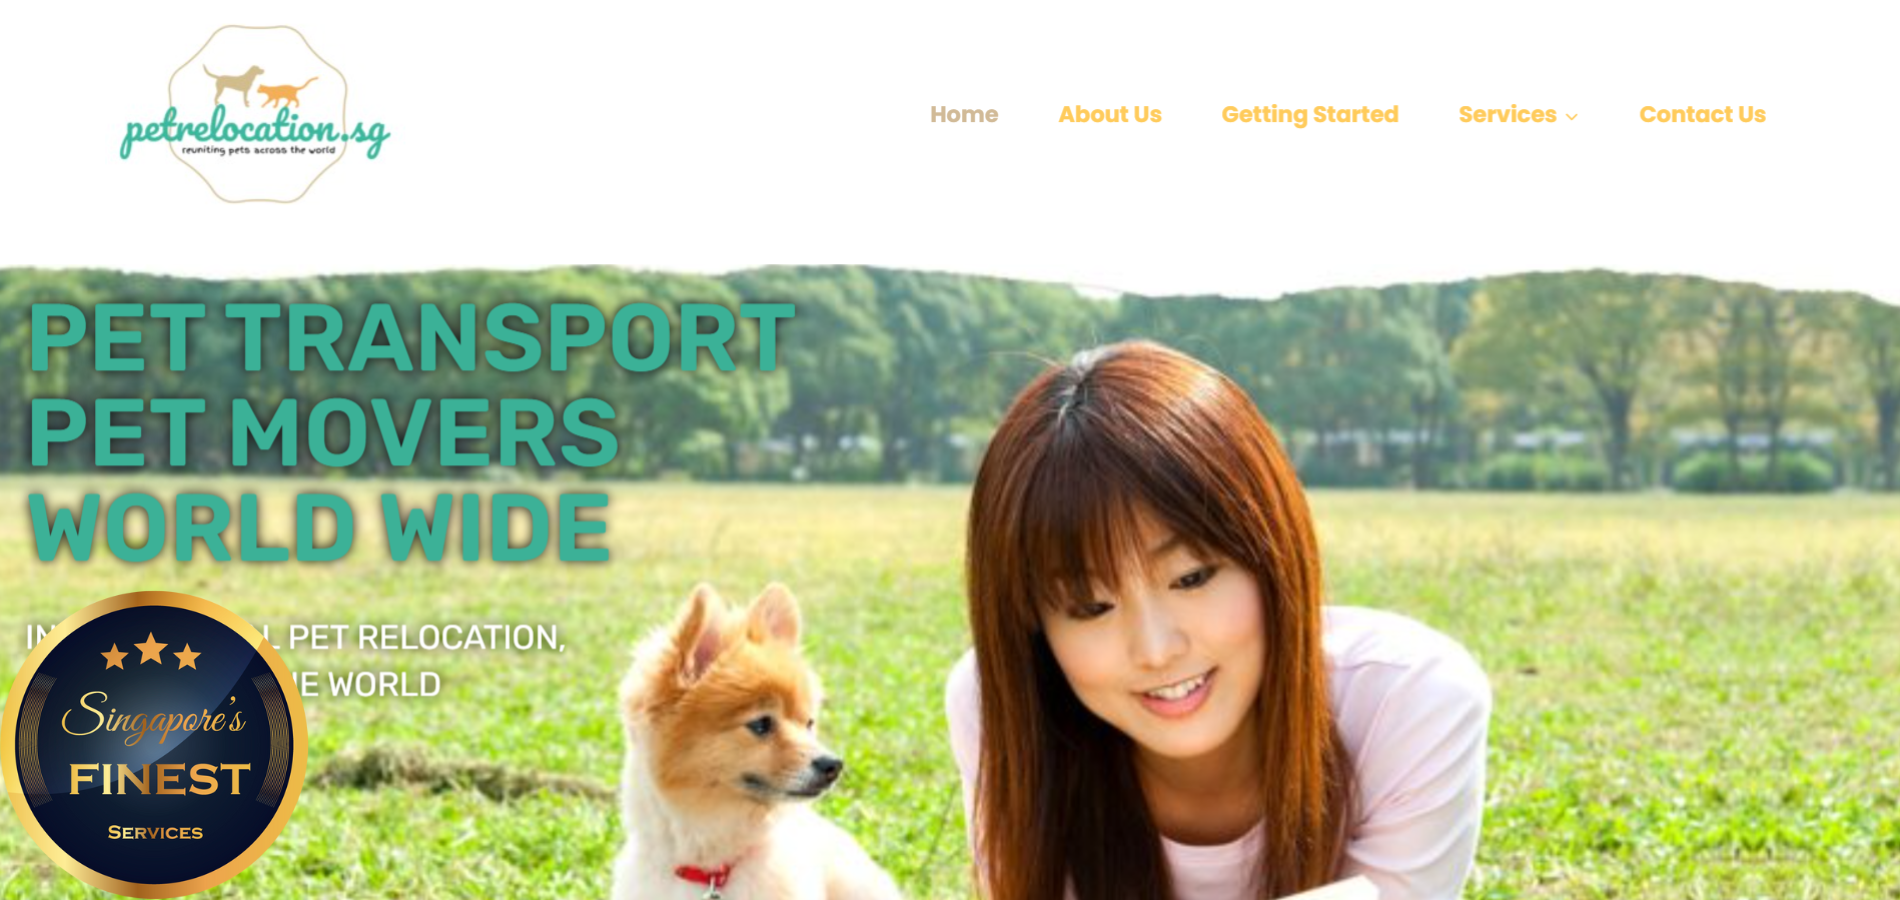 The Finest Pet Relocation Services in Singapore